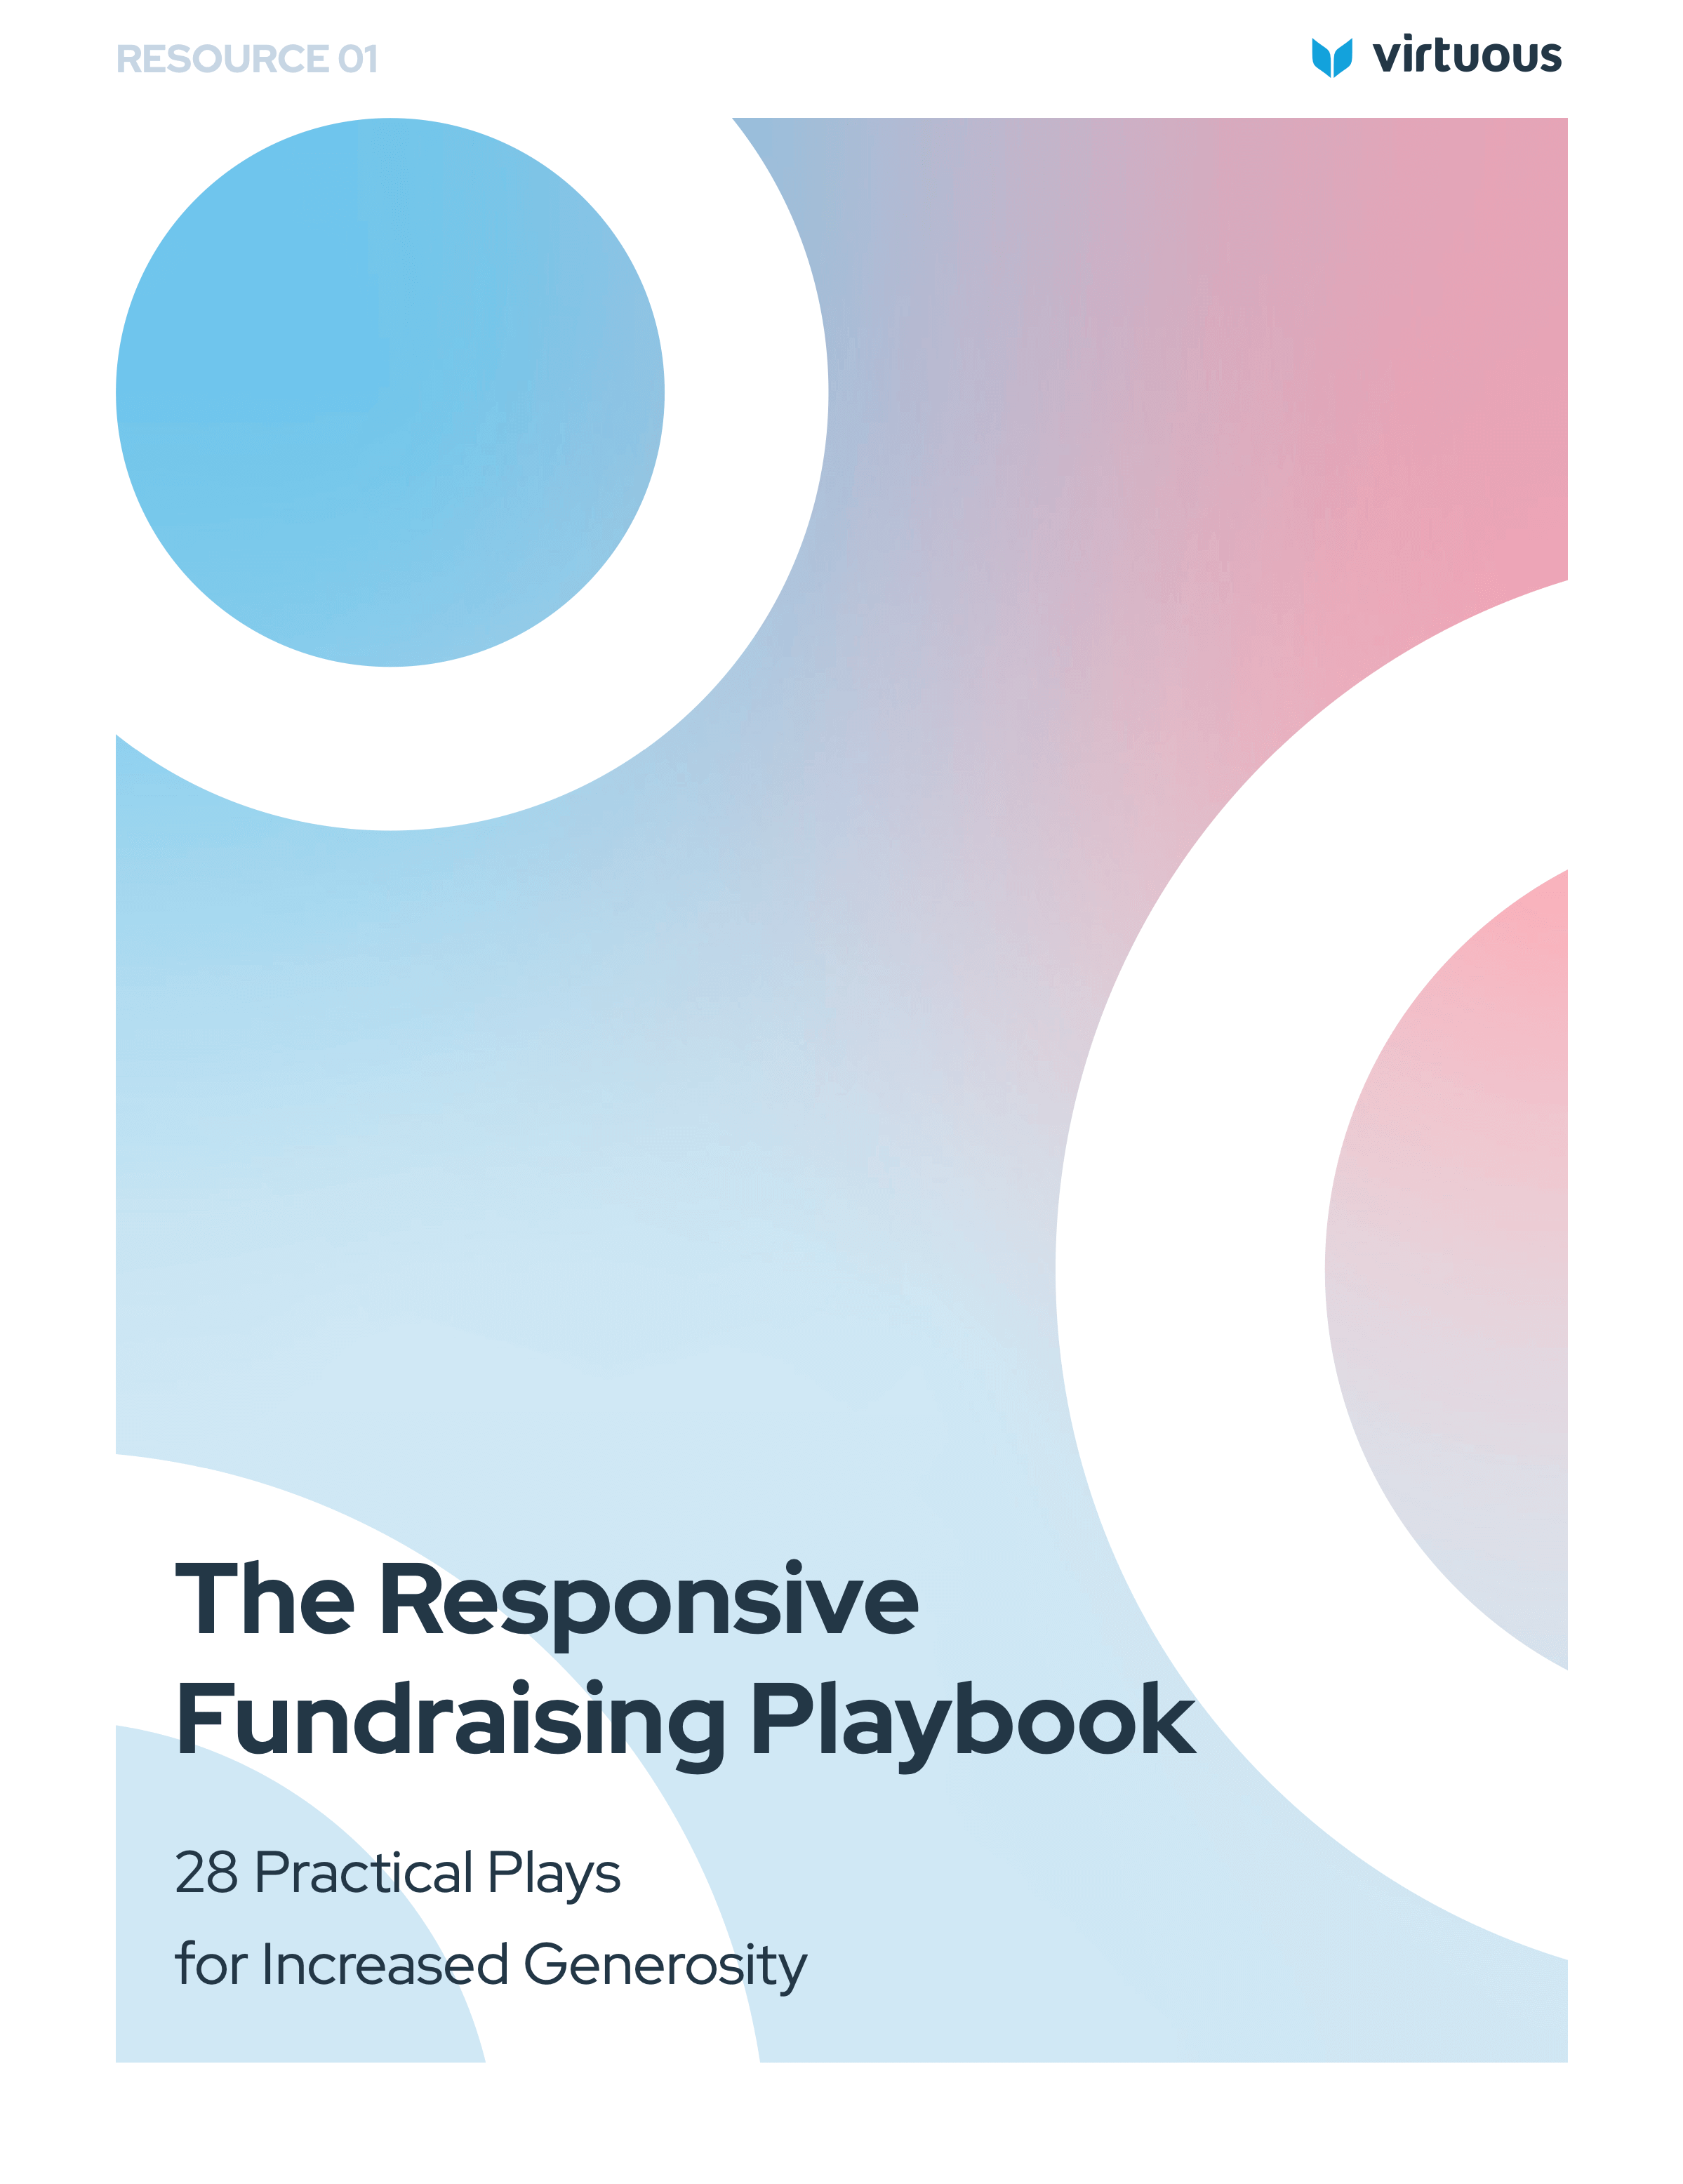 The Responsive Fundraising Playbook